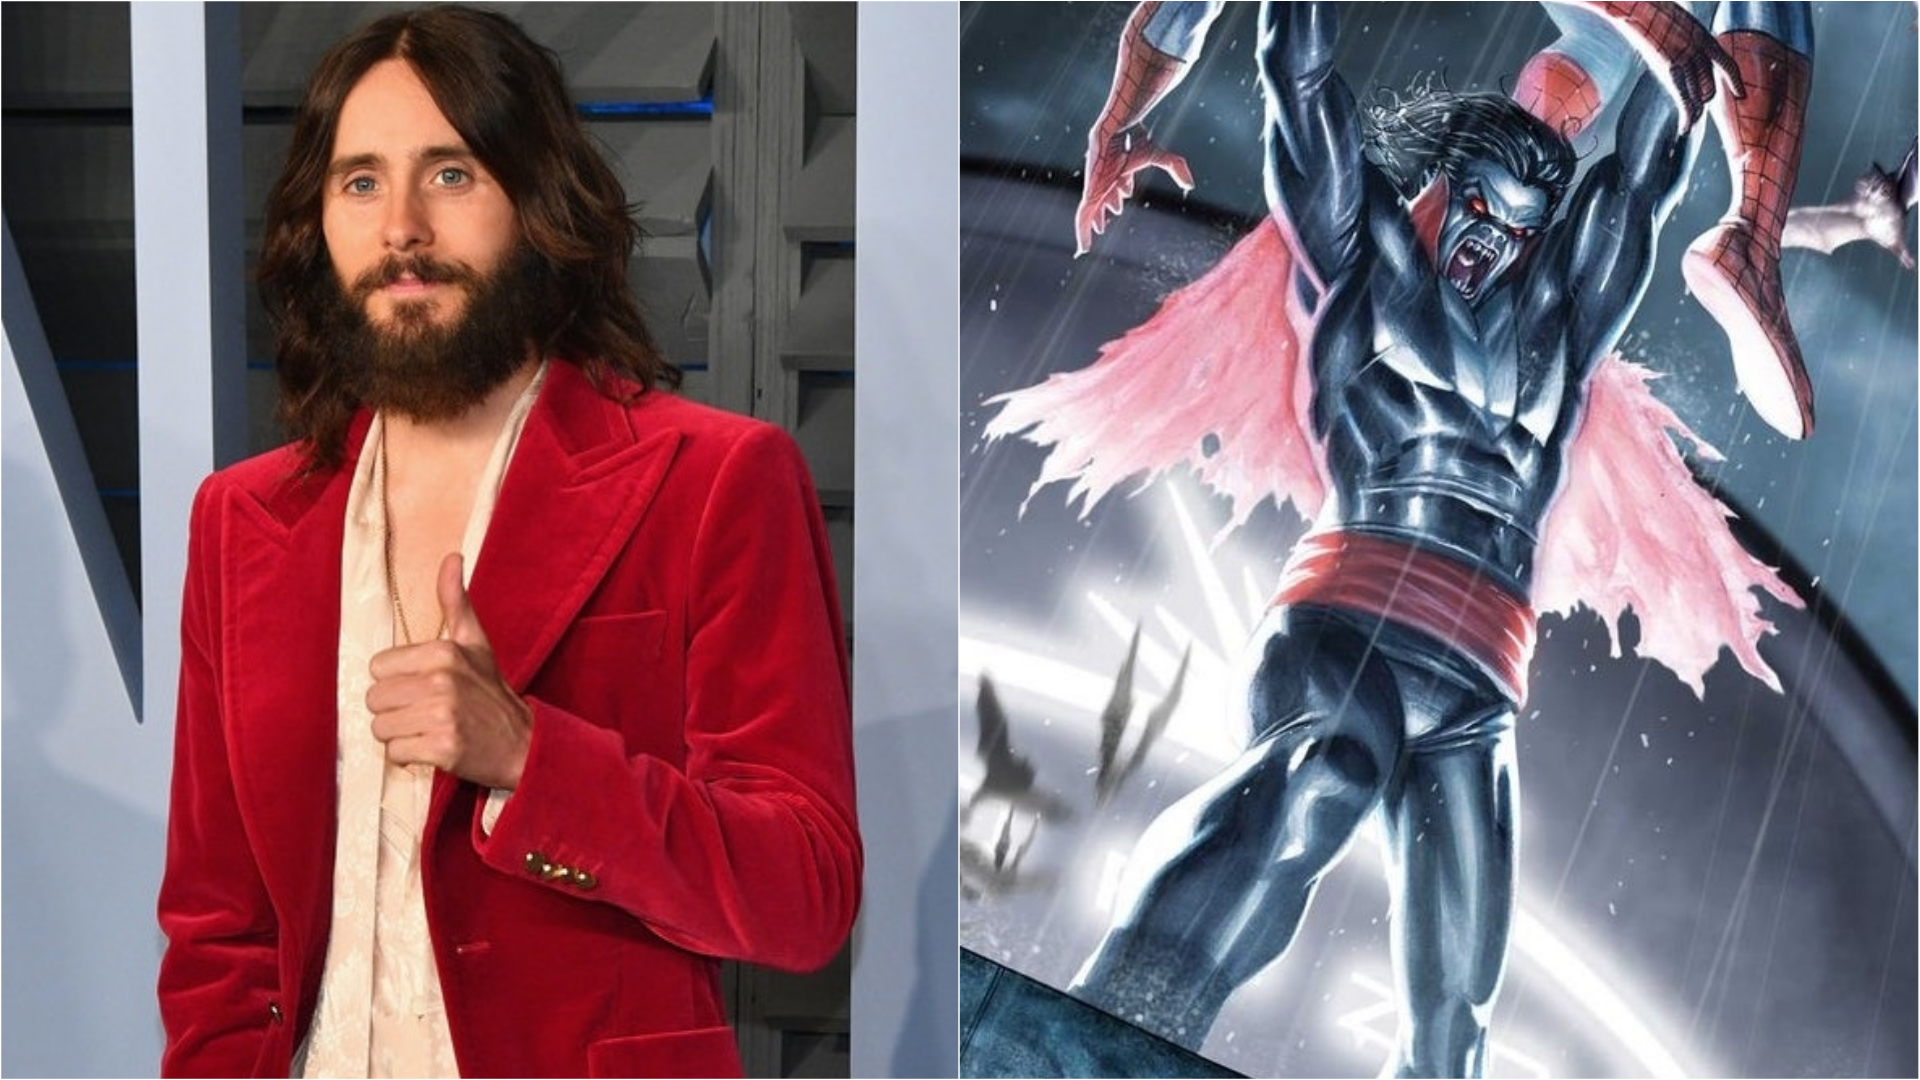 SUICIDE SQUAD Star Jared Leto Set To Star As MORBIUS THE